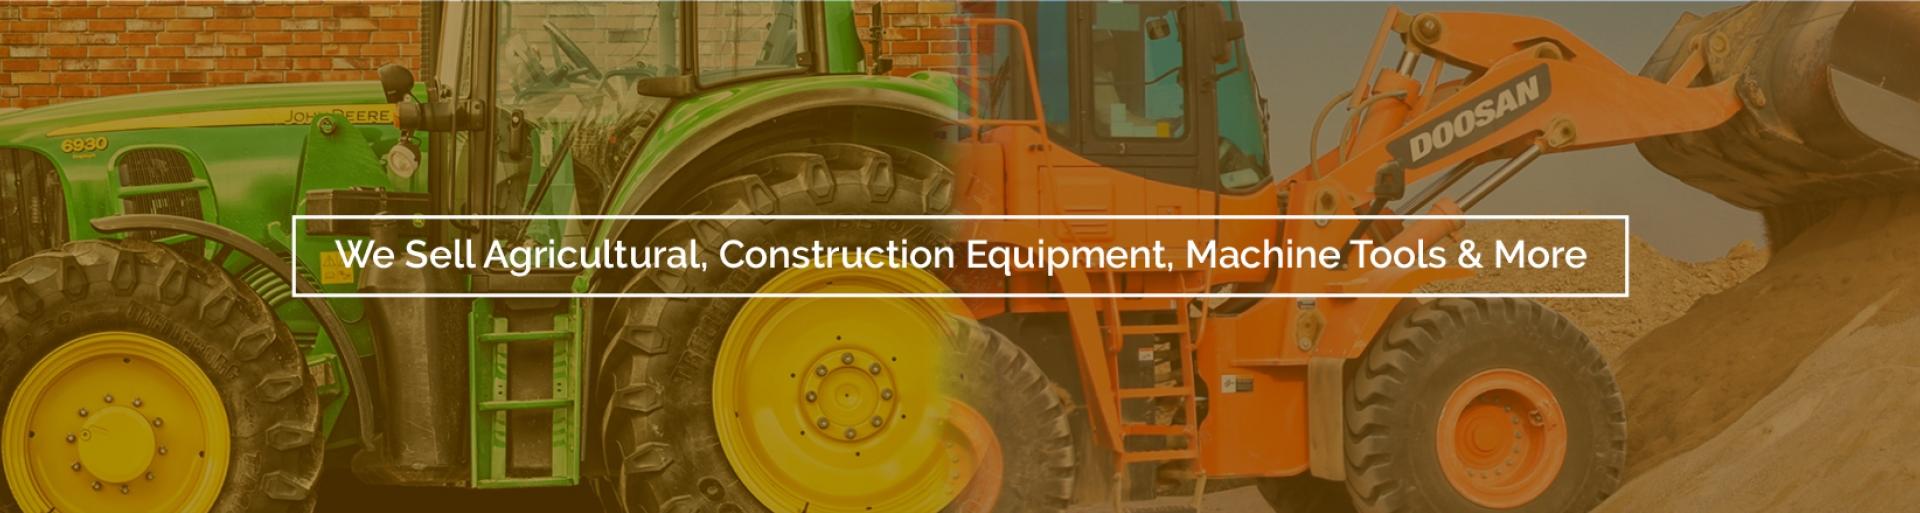 We Sell Agricultural, Construction Equipment, Machine Tools and More